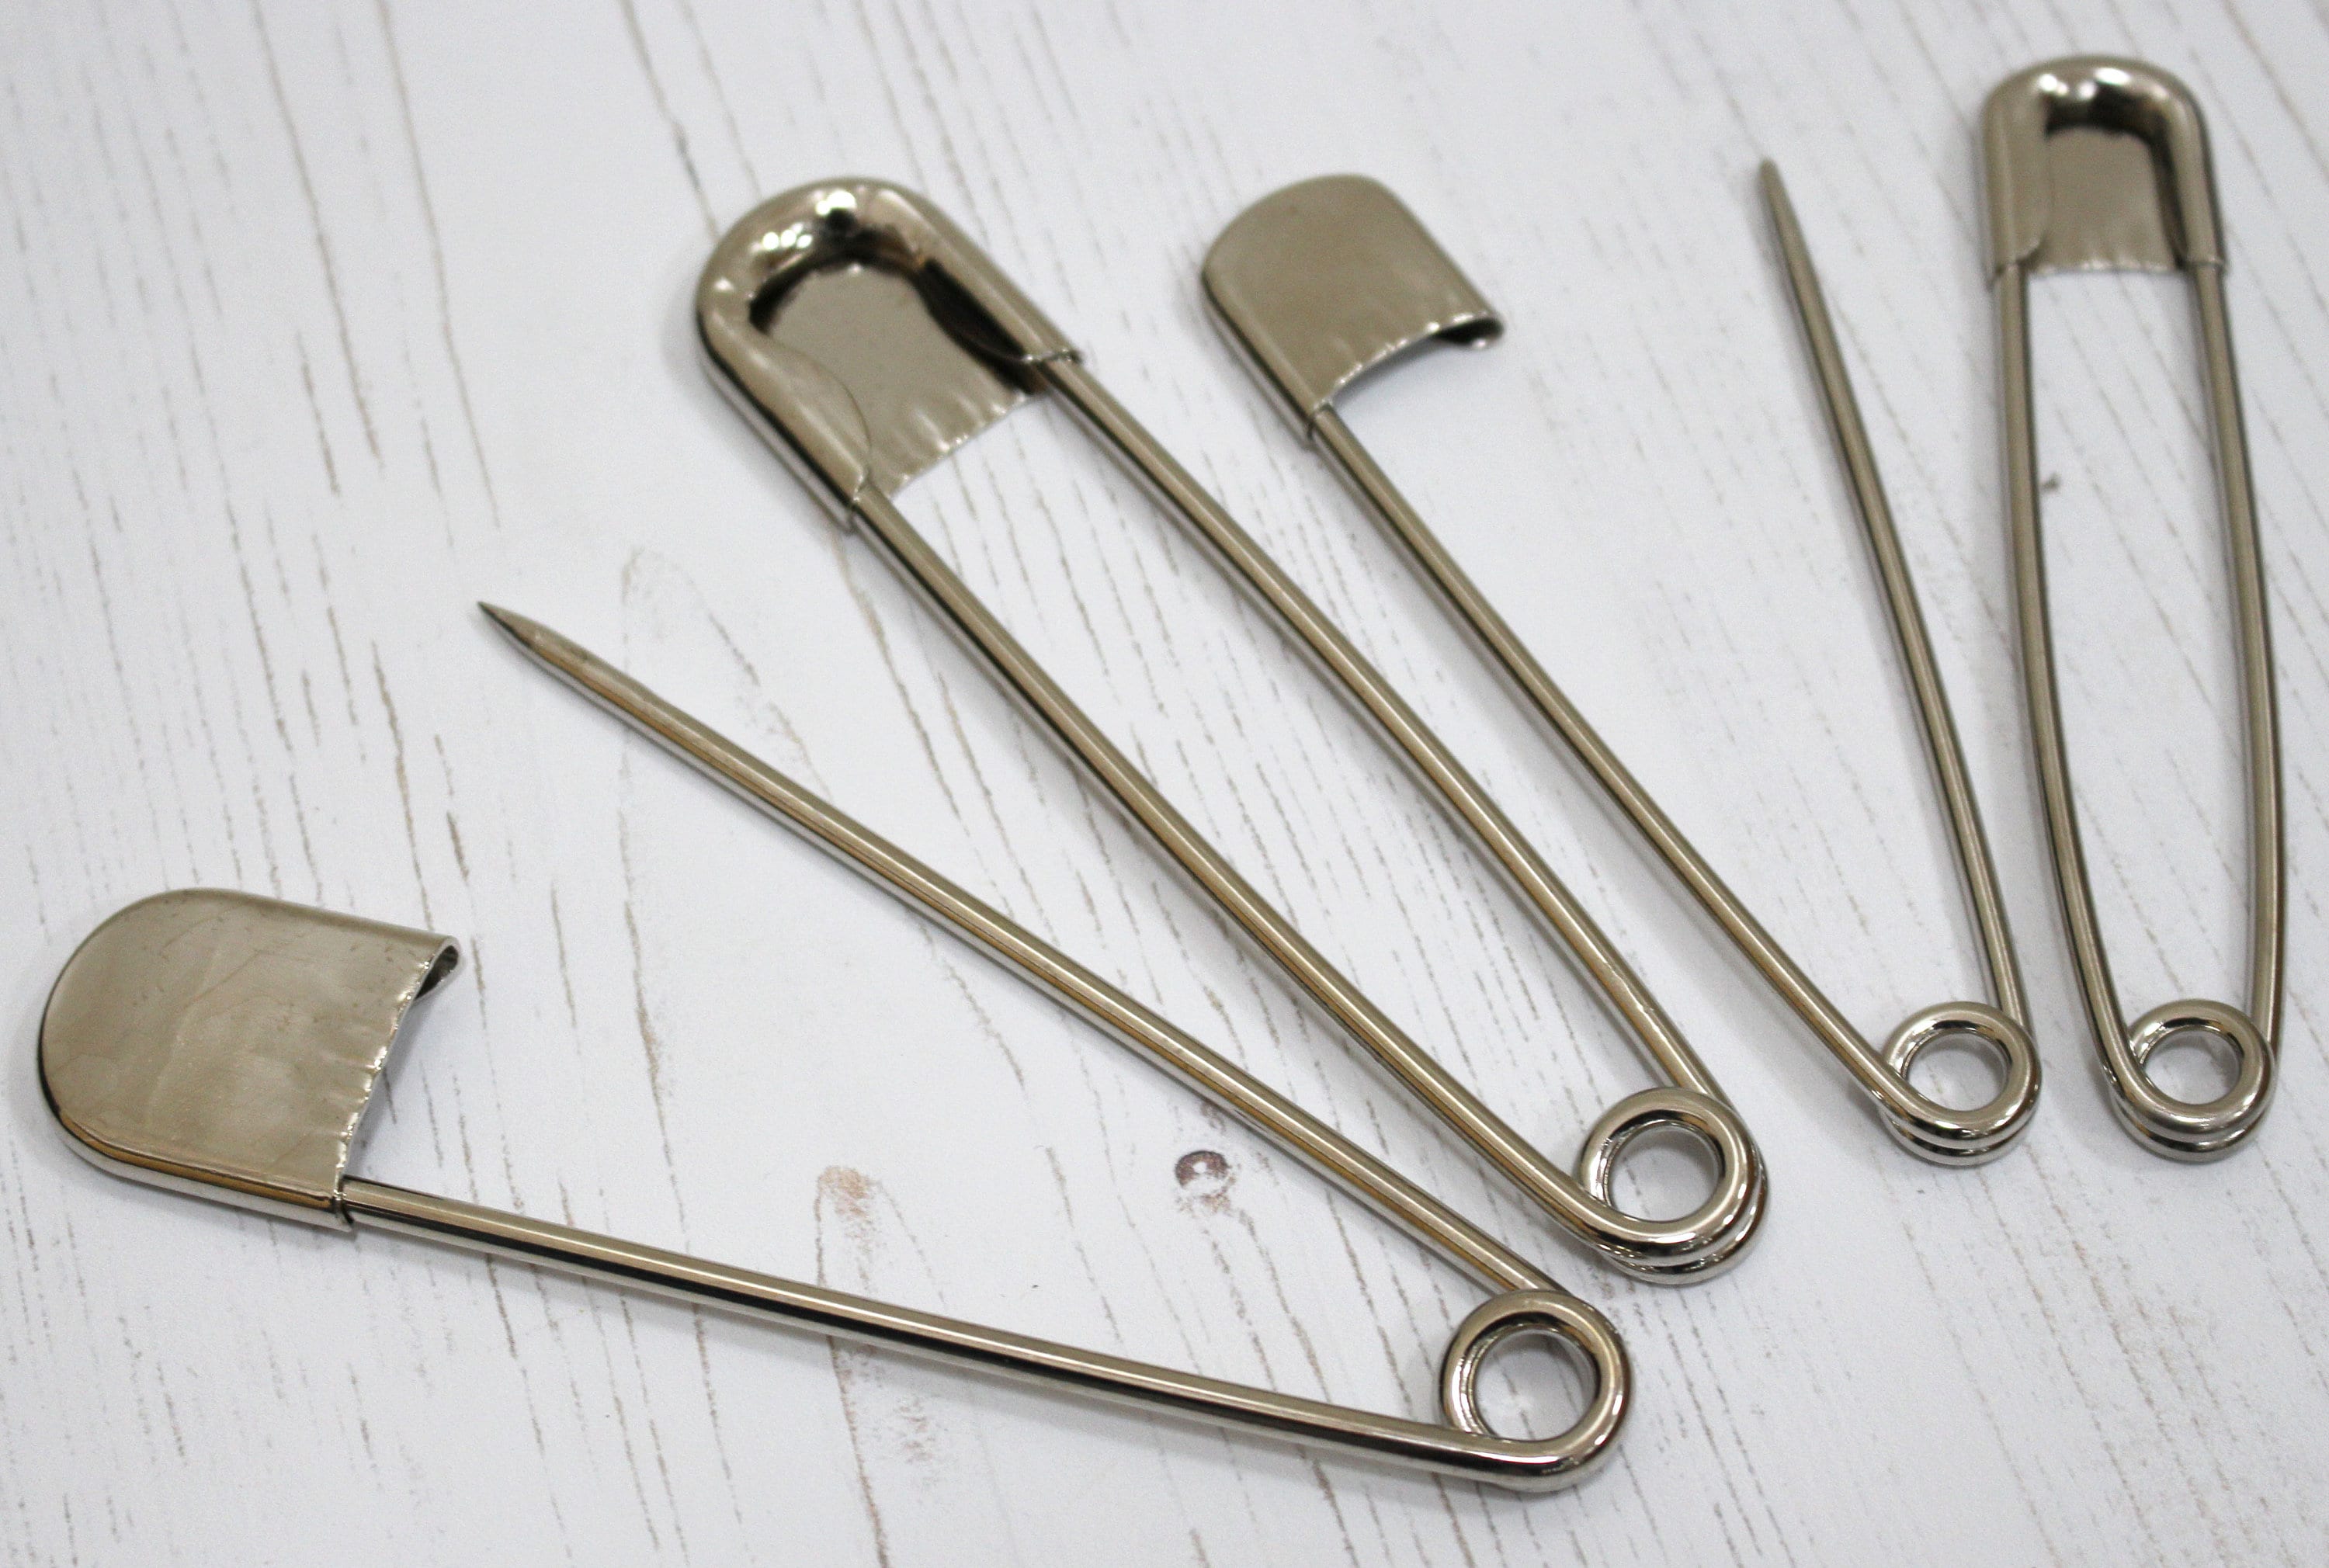 Tool Gadget Large Safety Pins, 3inch Safety Pins, 2pcs Stainless Steel Safety Pins Large, Silver Huge Strong Safety Pins, Extra Large Laundry Pins for